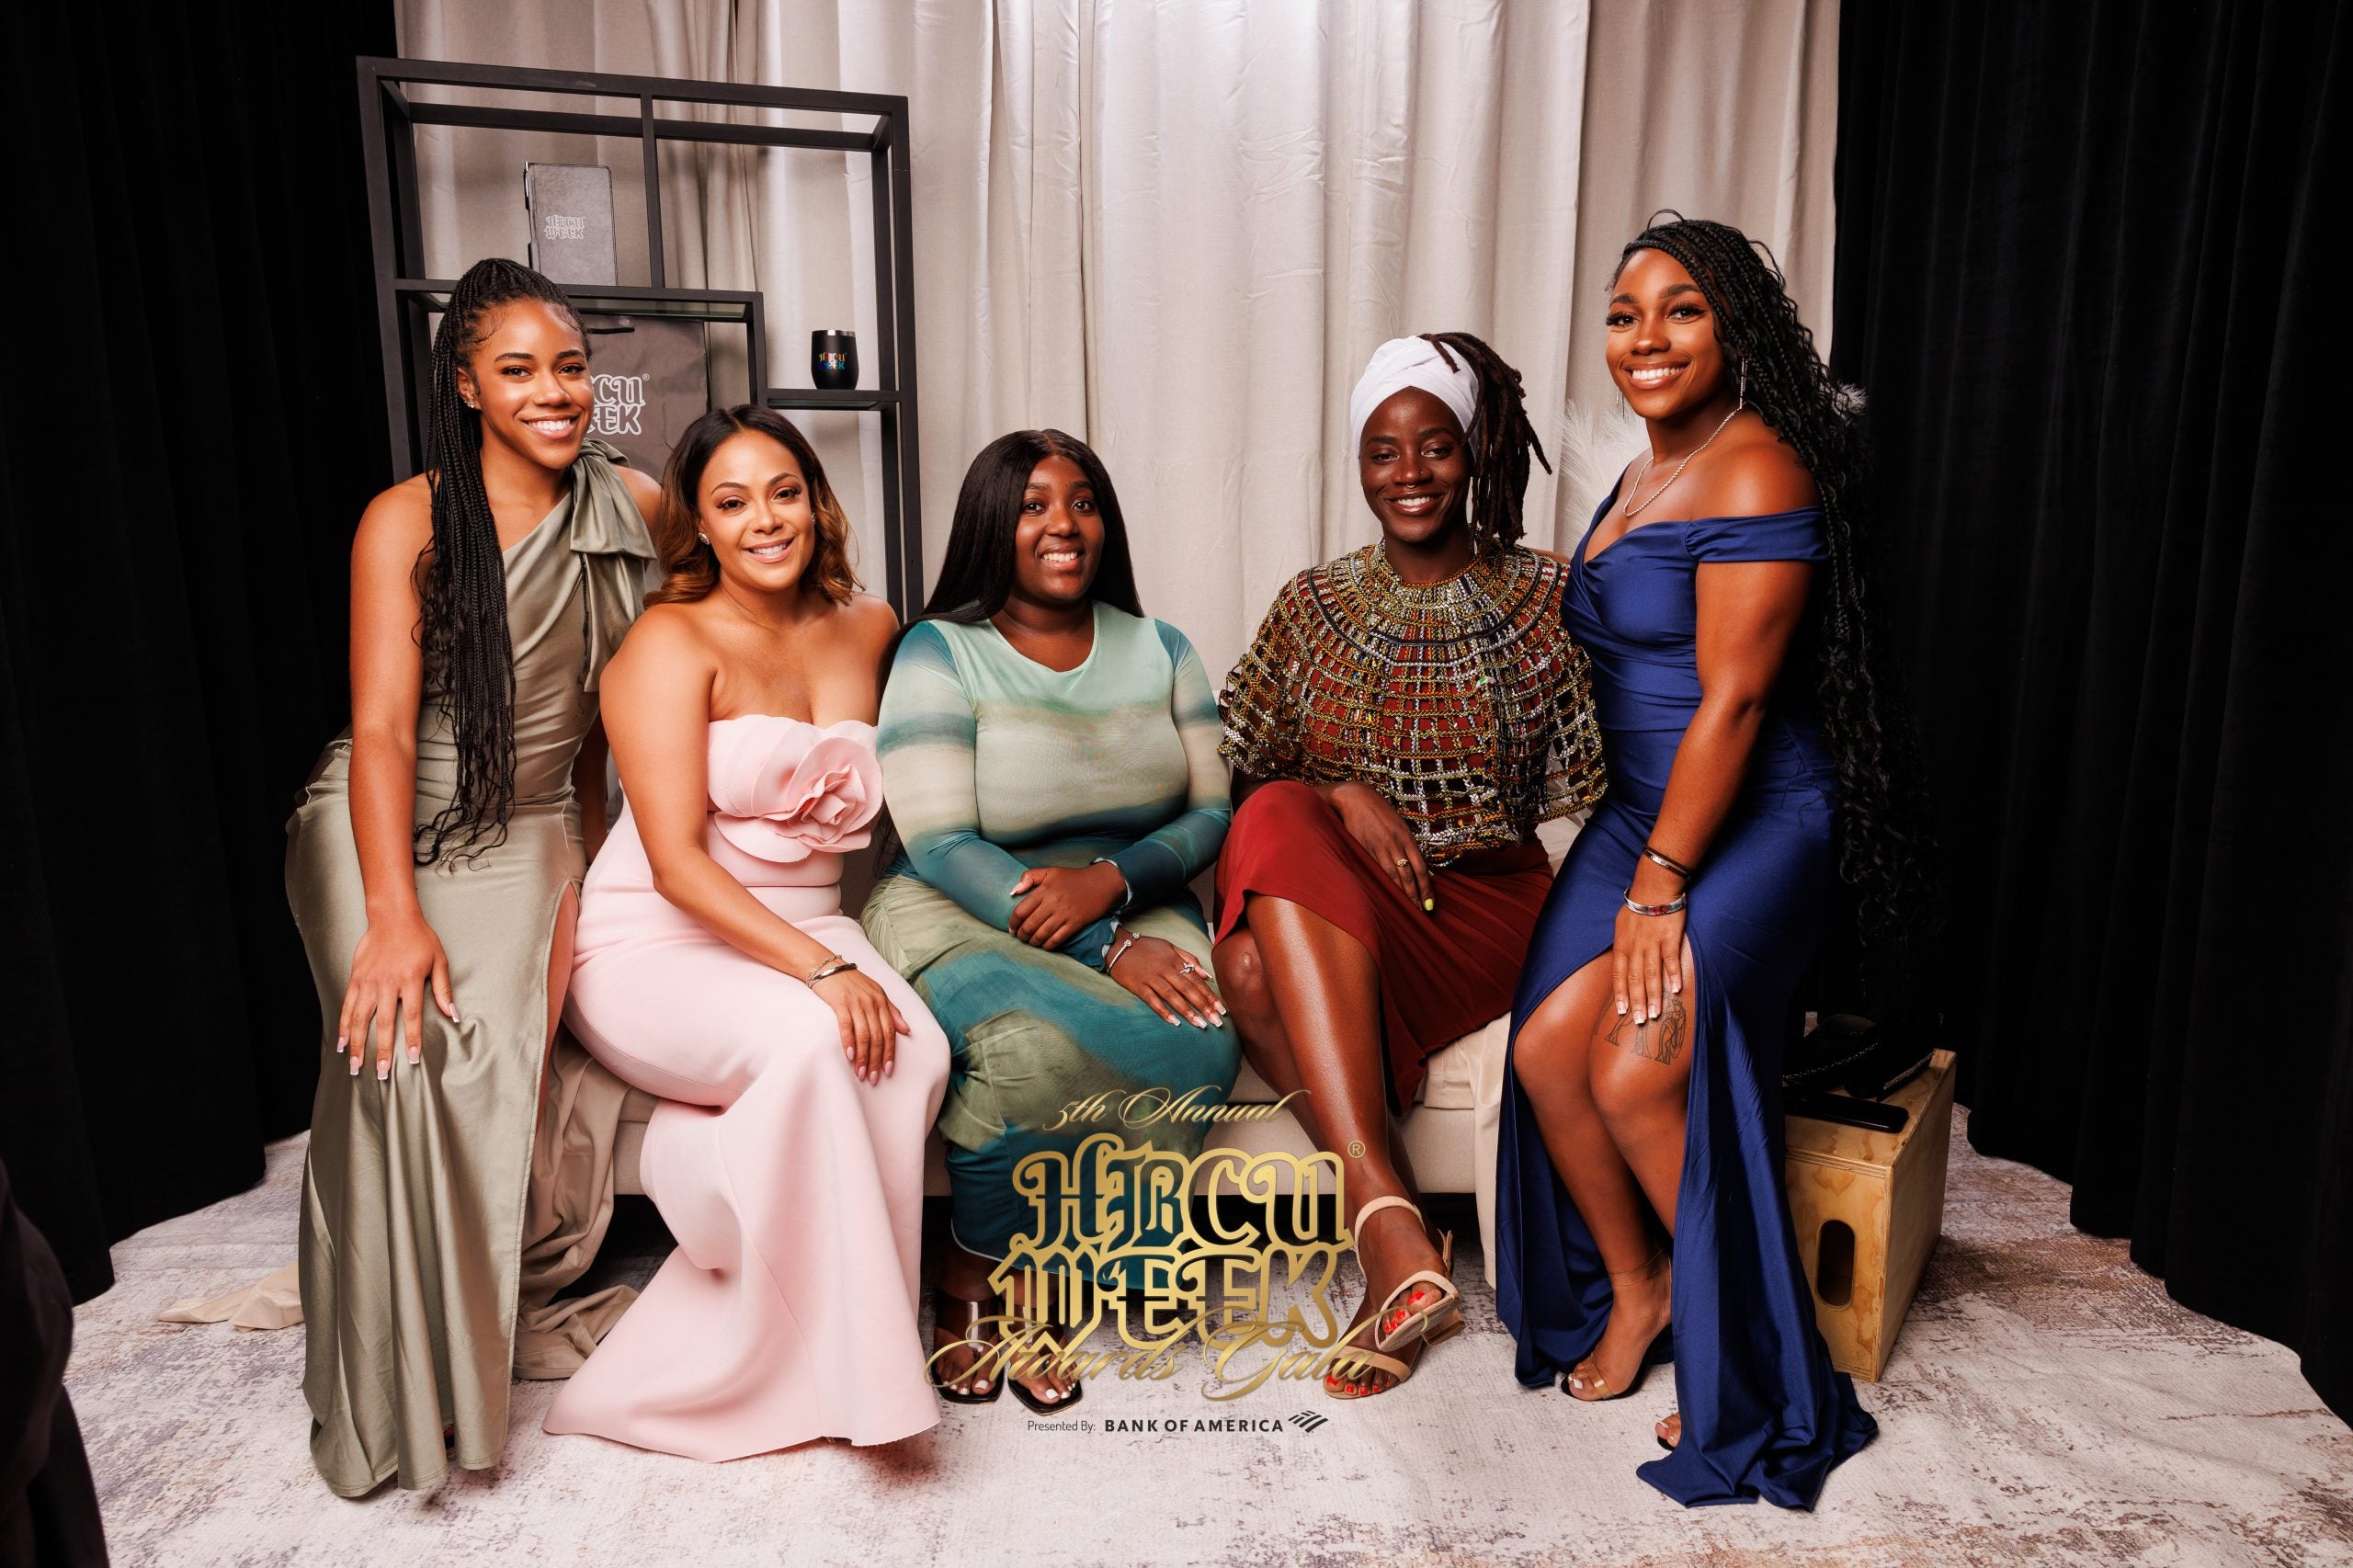 HBCU Week Awards Gala Continues to Bridge Gaps For The Next Generation